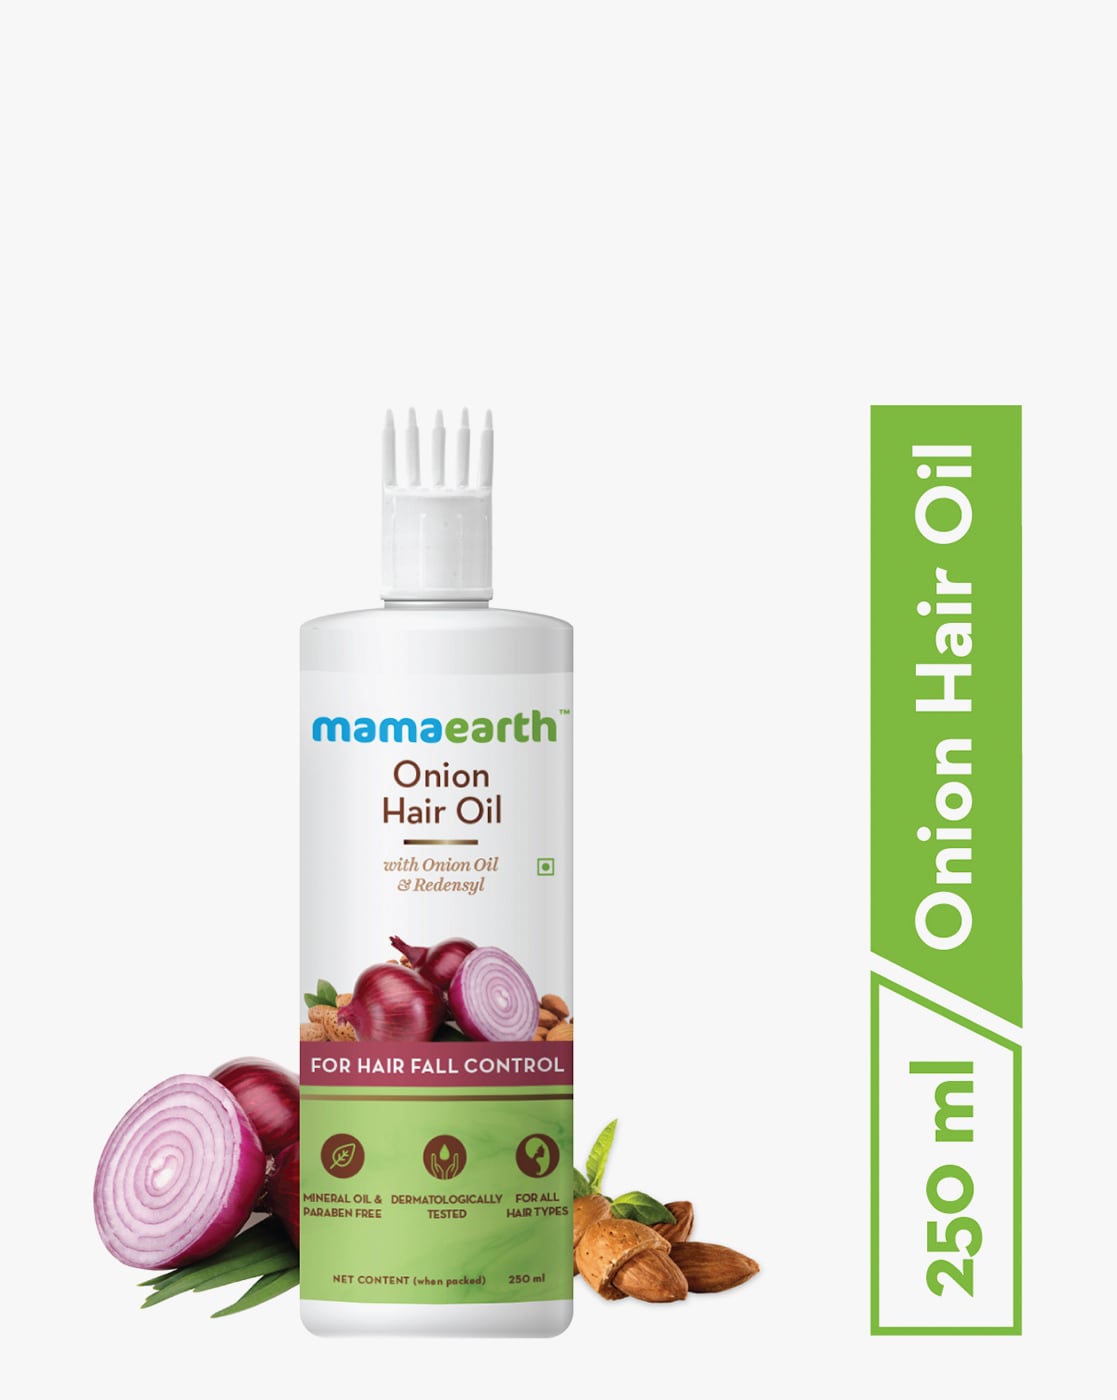 Onion Hair Oil For Hair Regrowth And Hair Fall Control With Redensyl